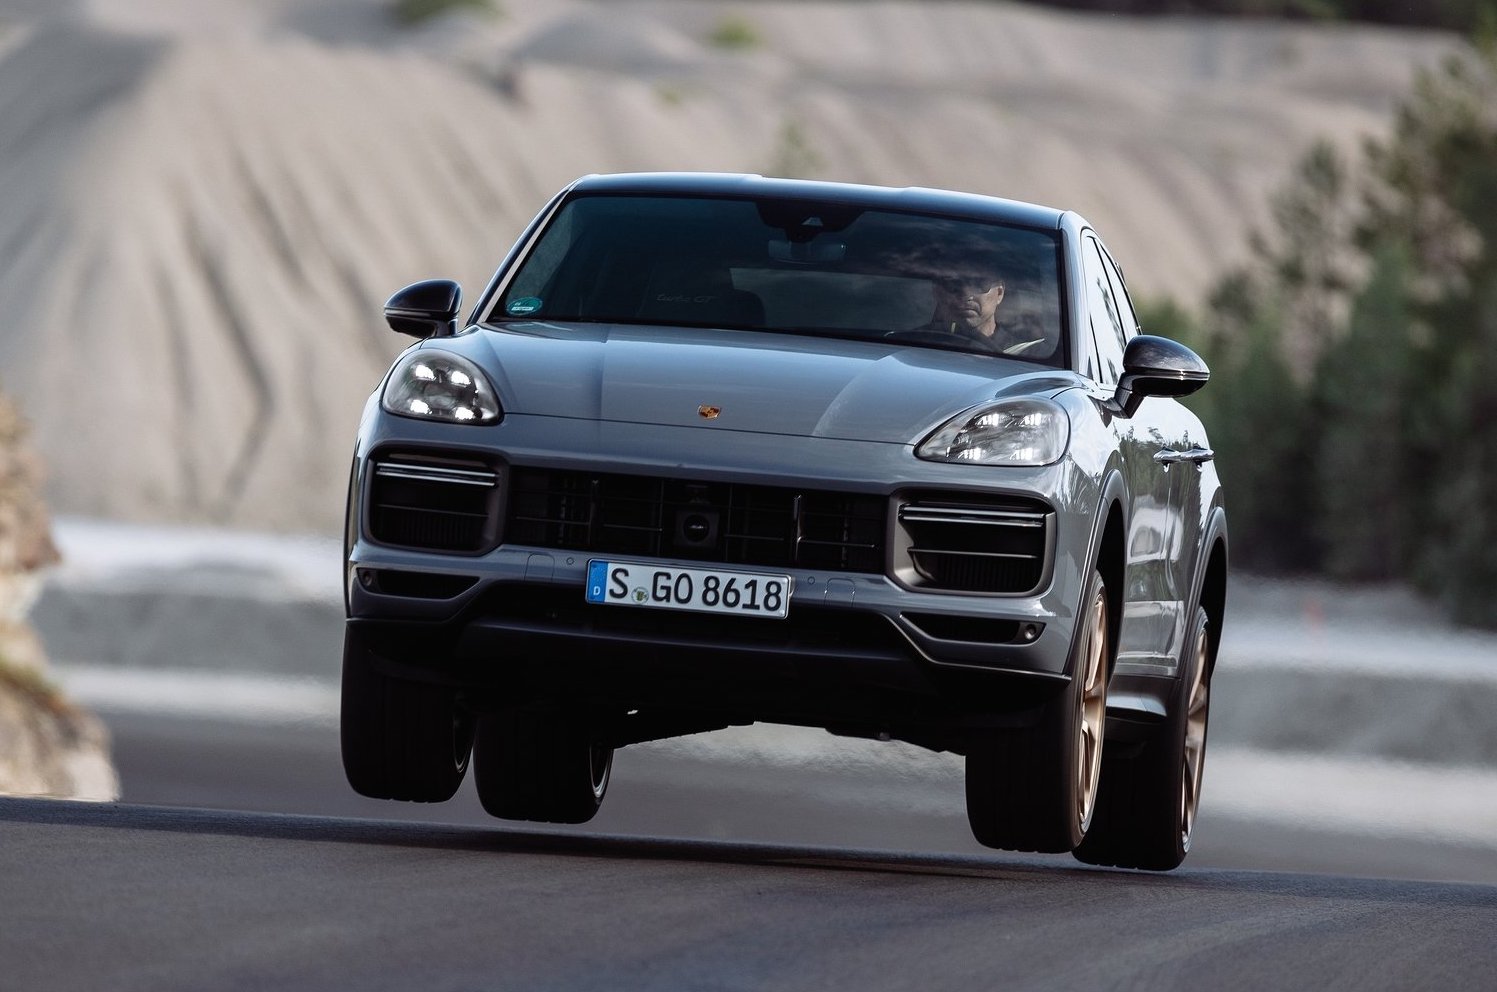 Porsche global sales hit new record in 2022, up 3% on 2021 record